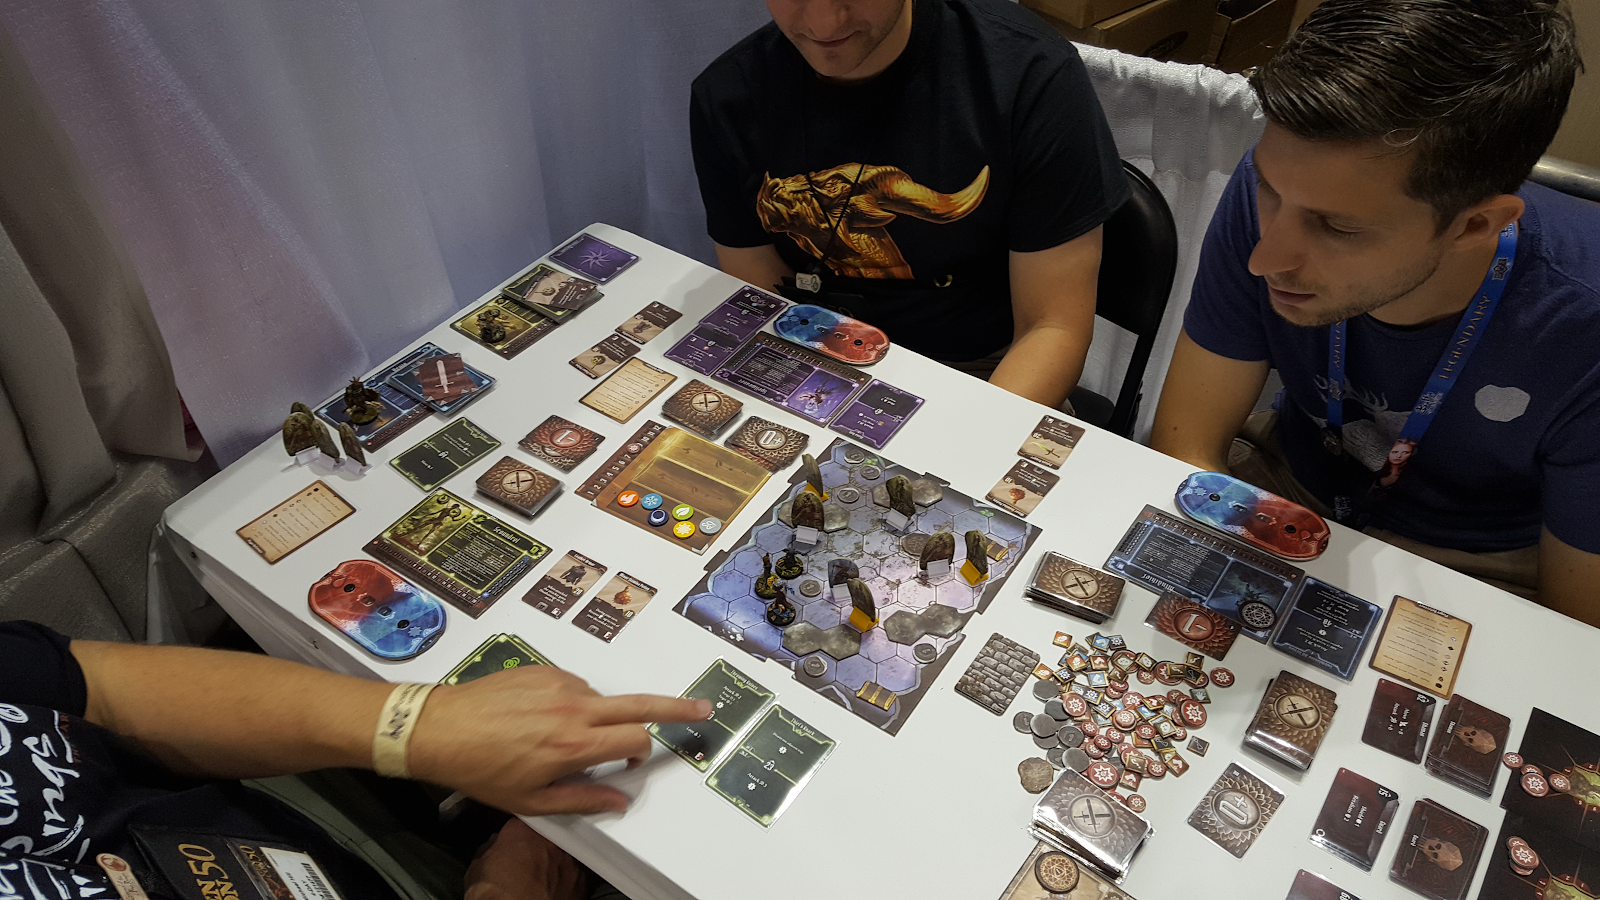 Gloomhaven: Does it live up to the hype? (Review by RJ Garrison)